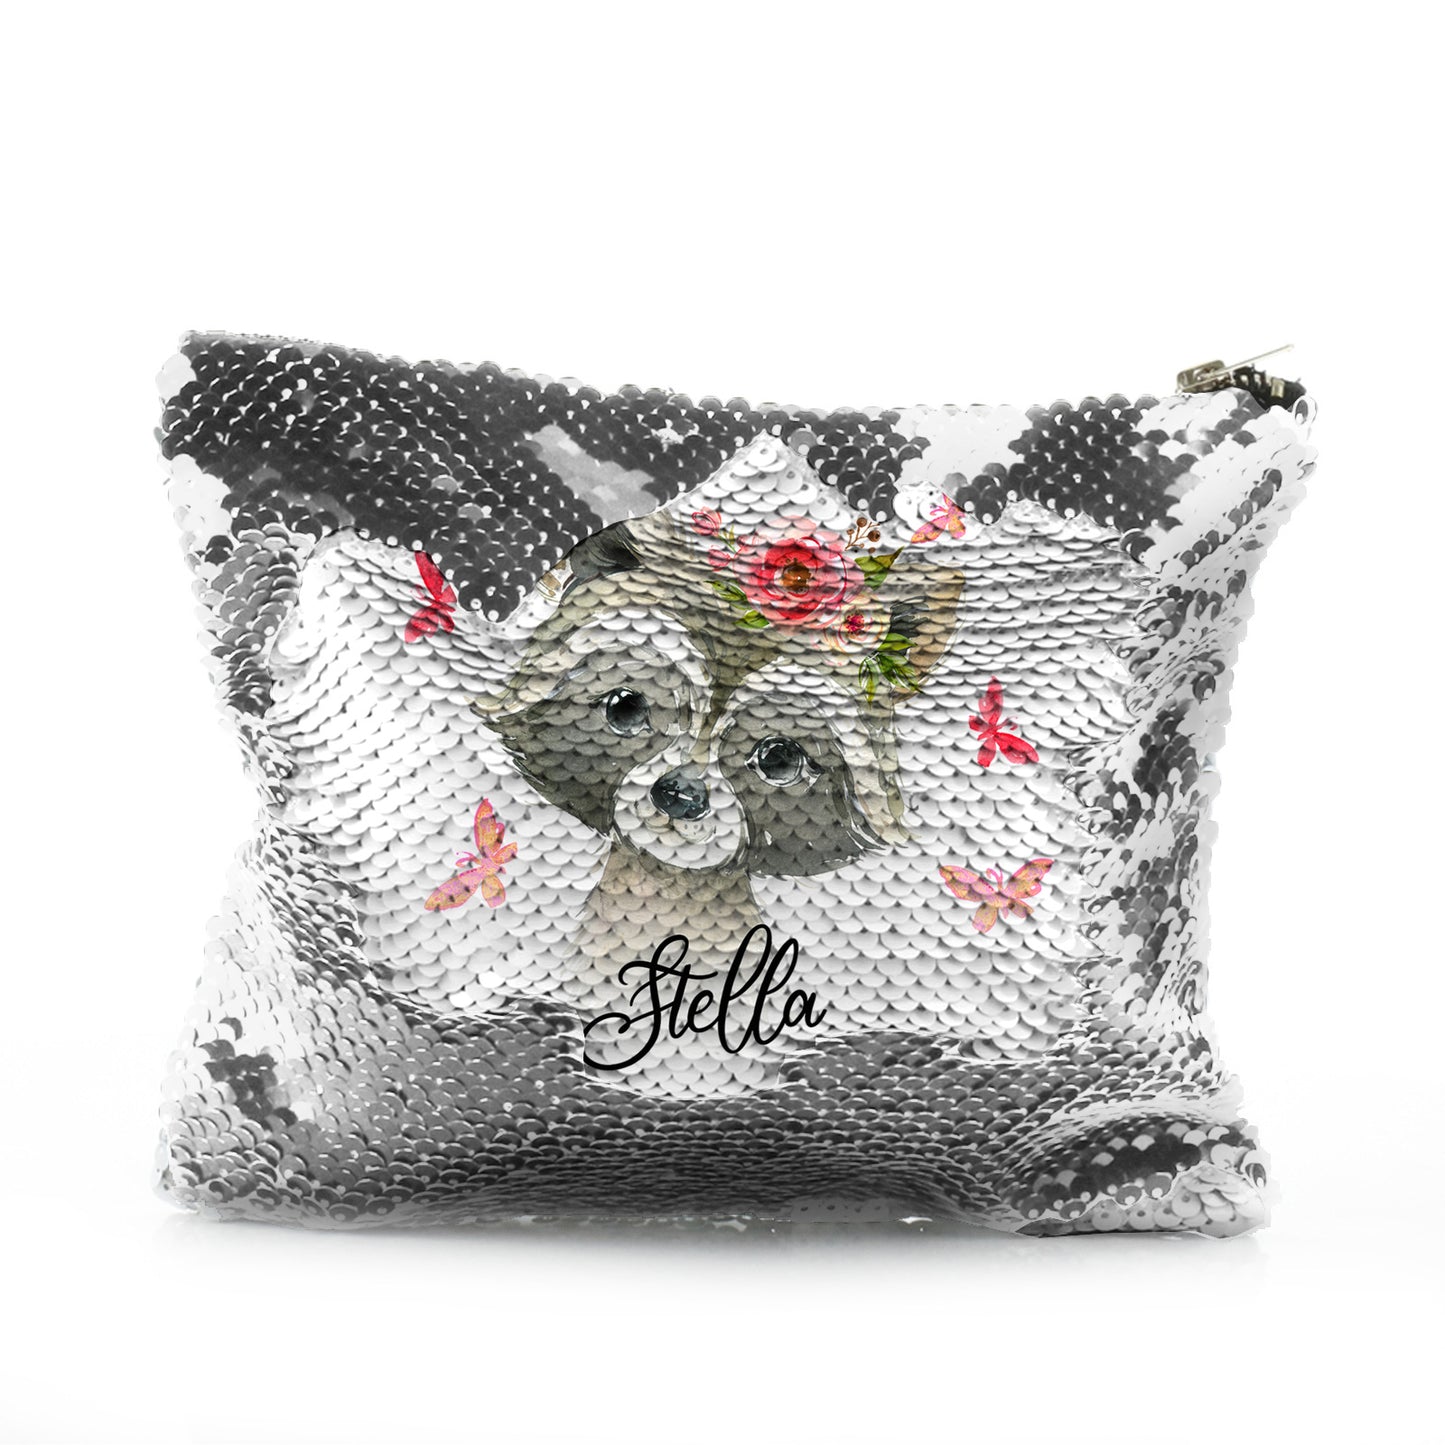 Personalised Sequin Zip Bag with Raccoon Pink Butterfly Flowers and Cute Text